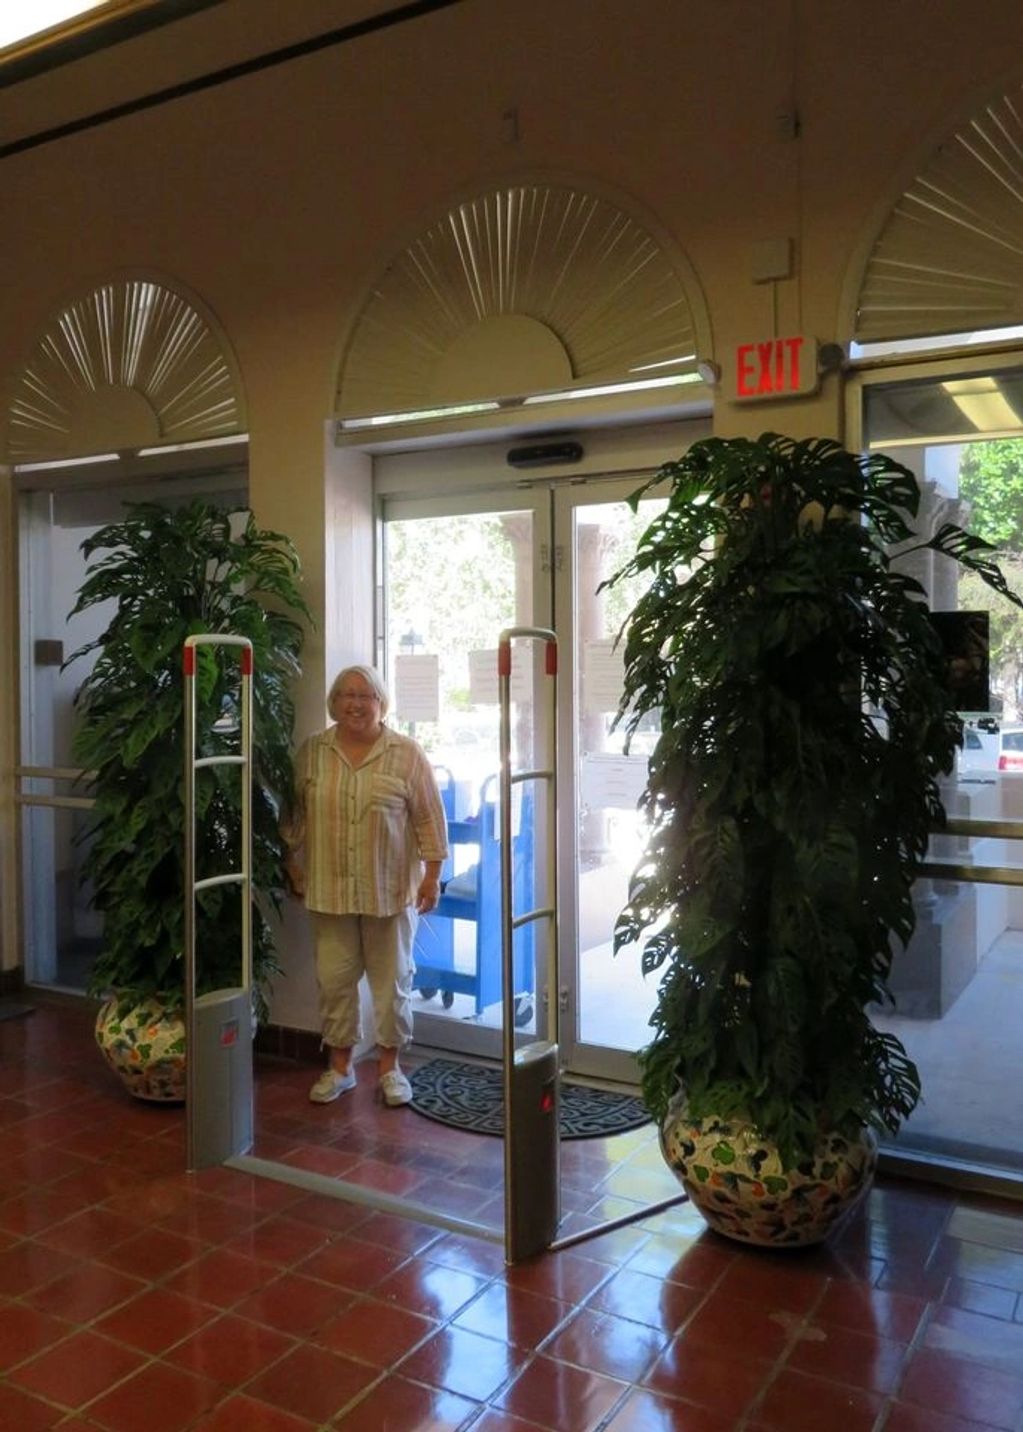 The Library Entrace with new plants provided by the Friends